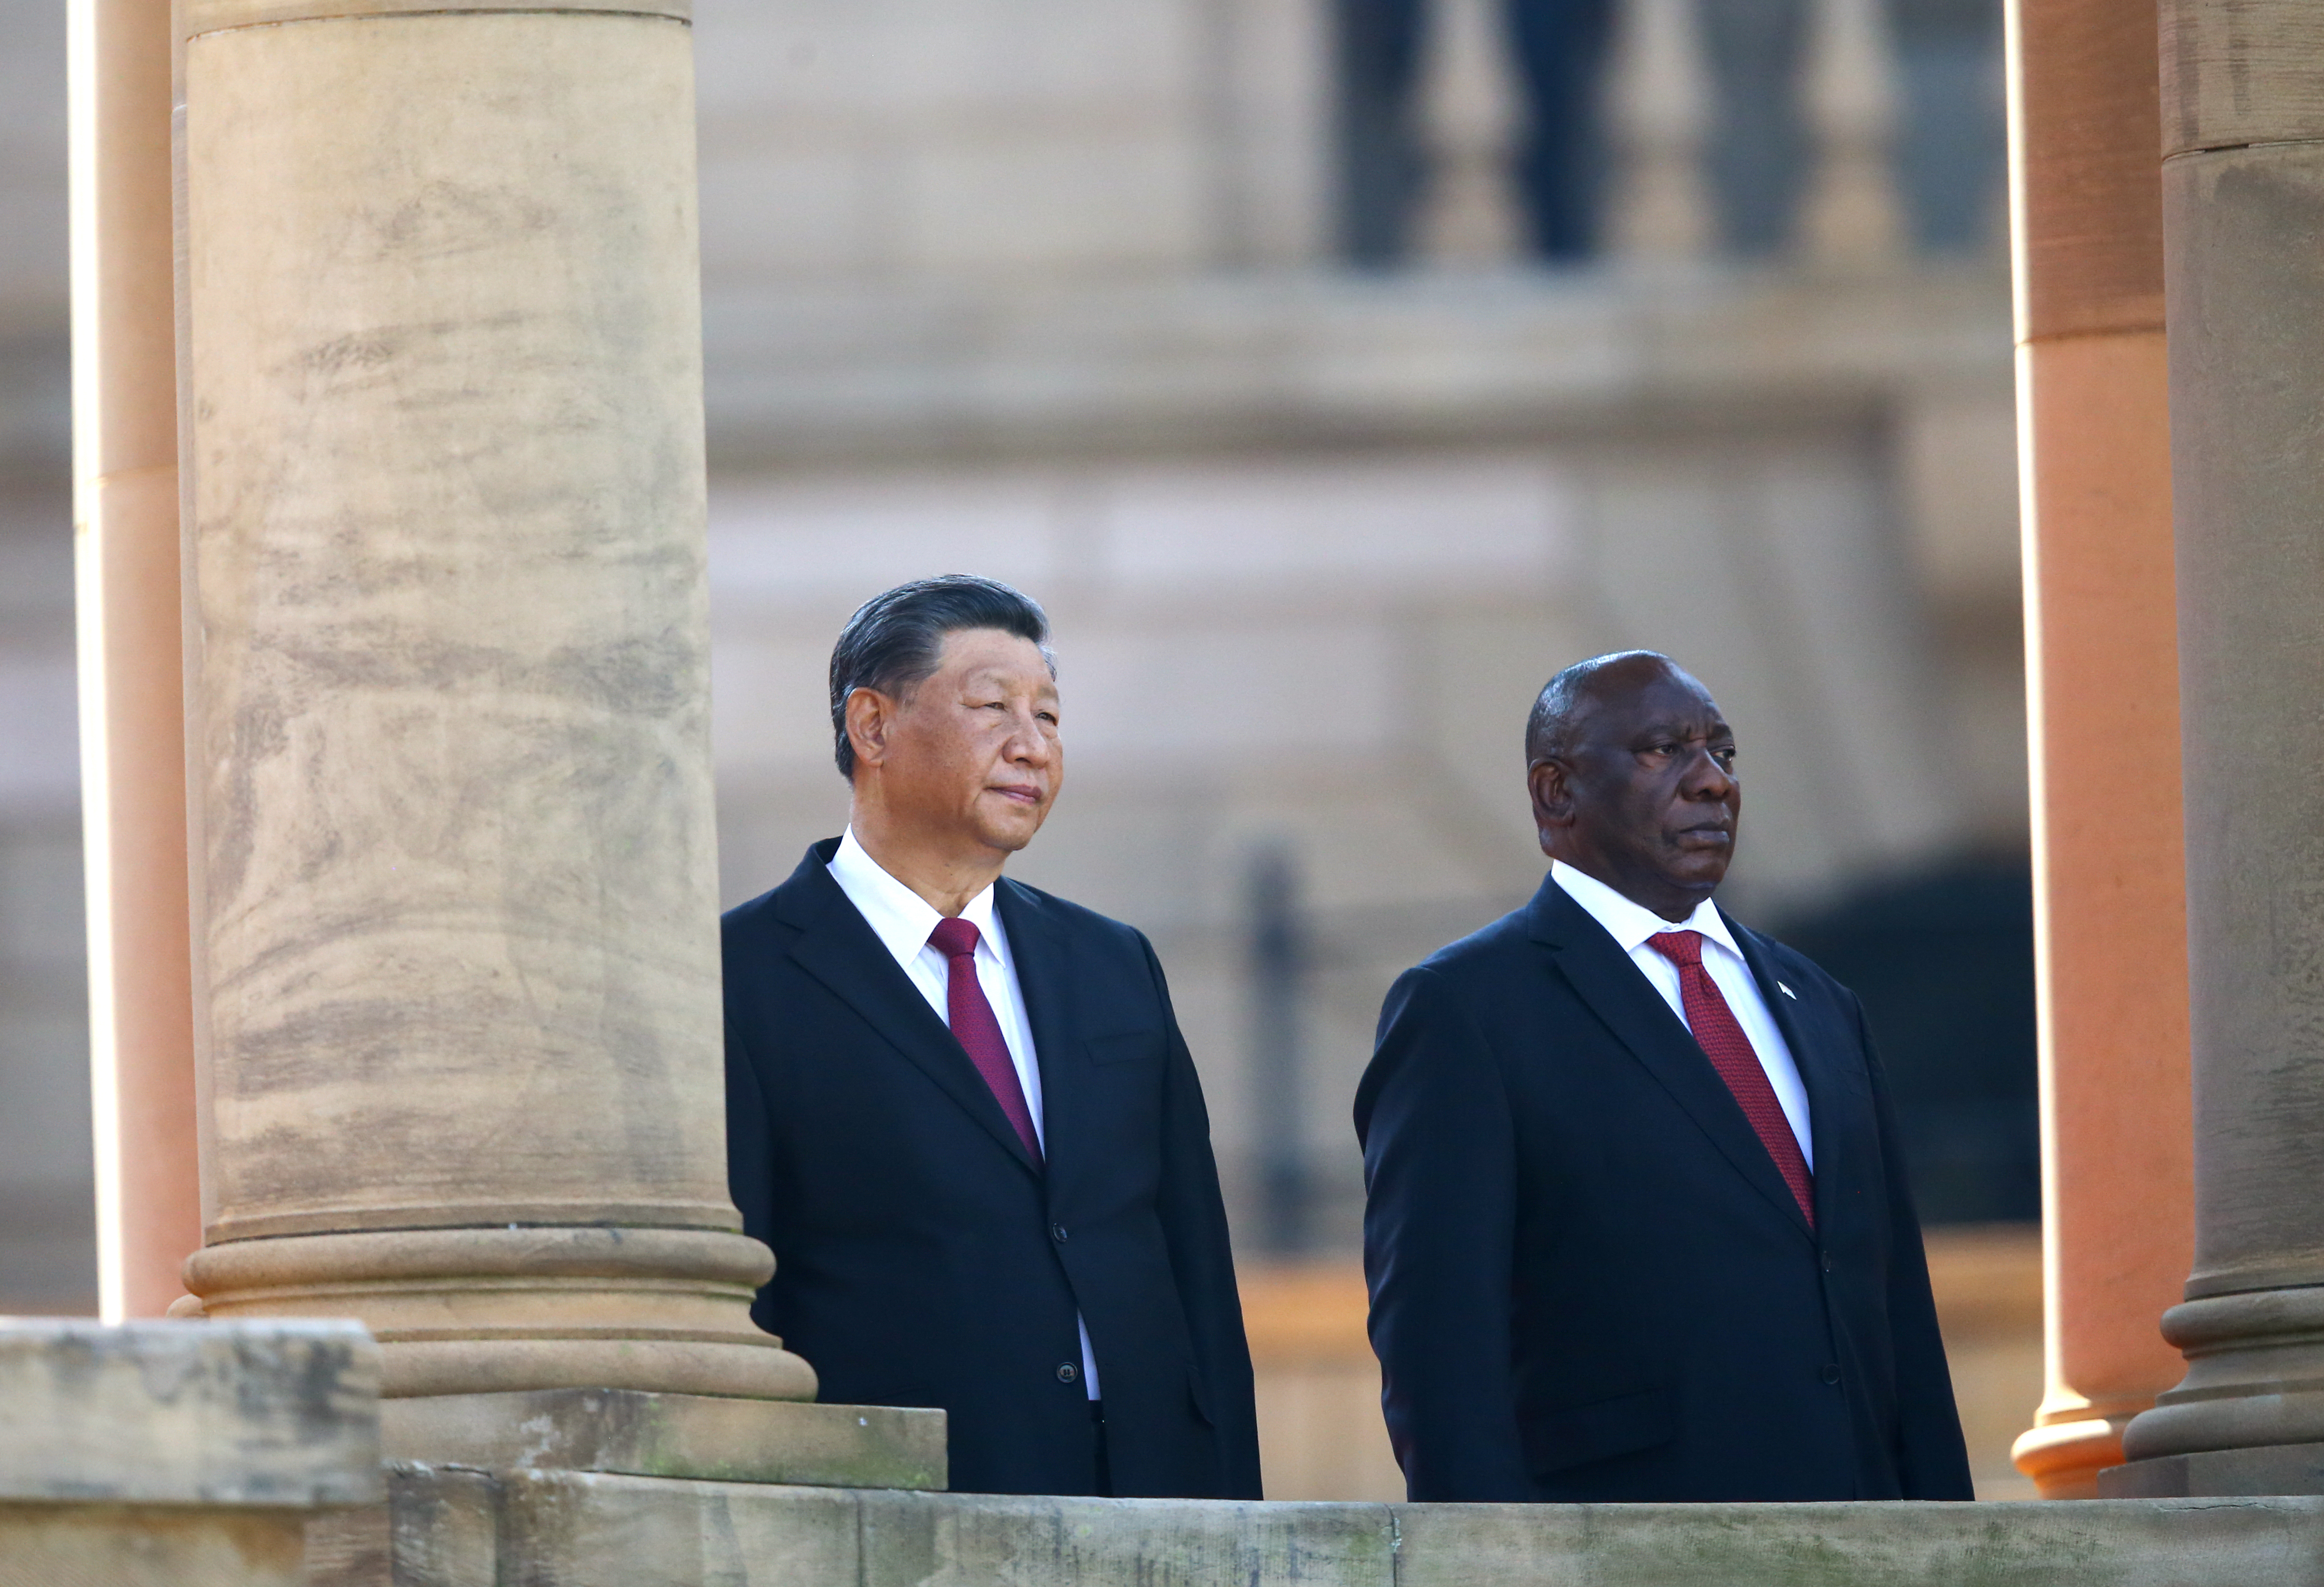 Chinese President Xi Jinping (L) and South African President Cyril Ramaphosa ahead of the Brics Summit